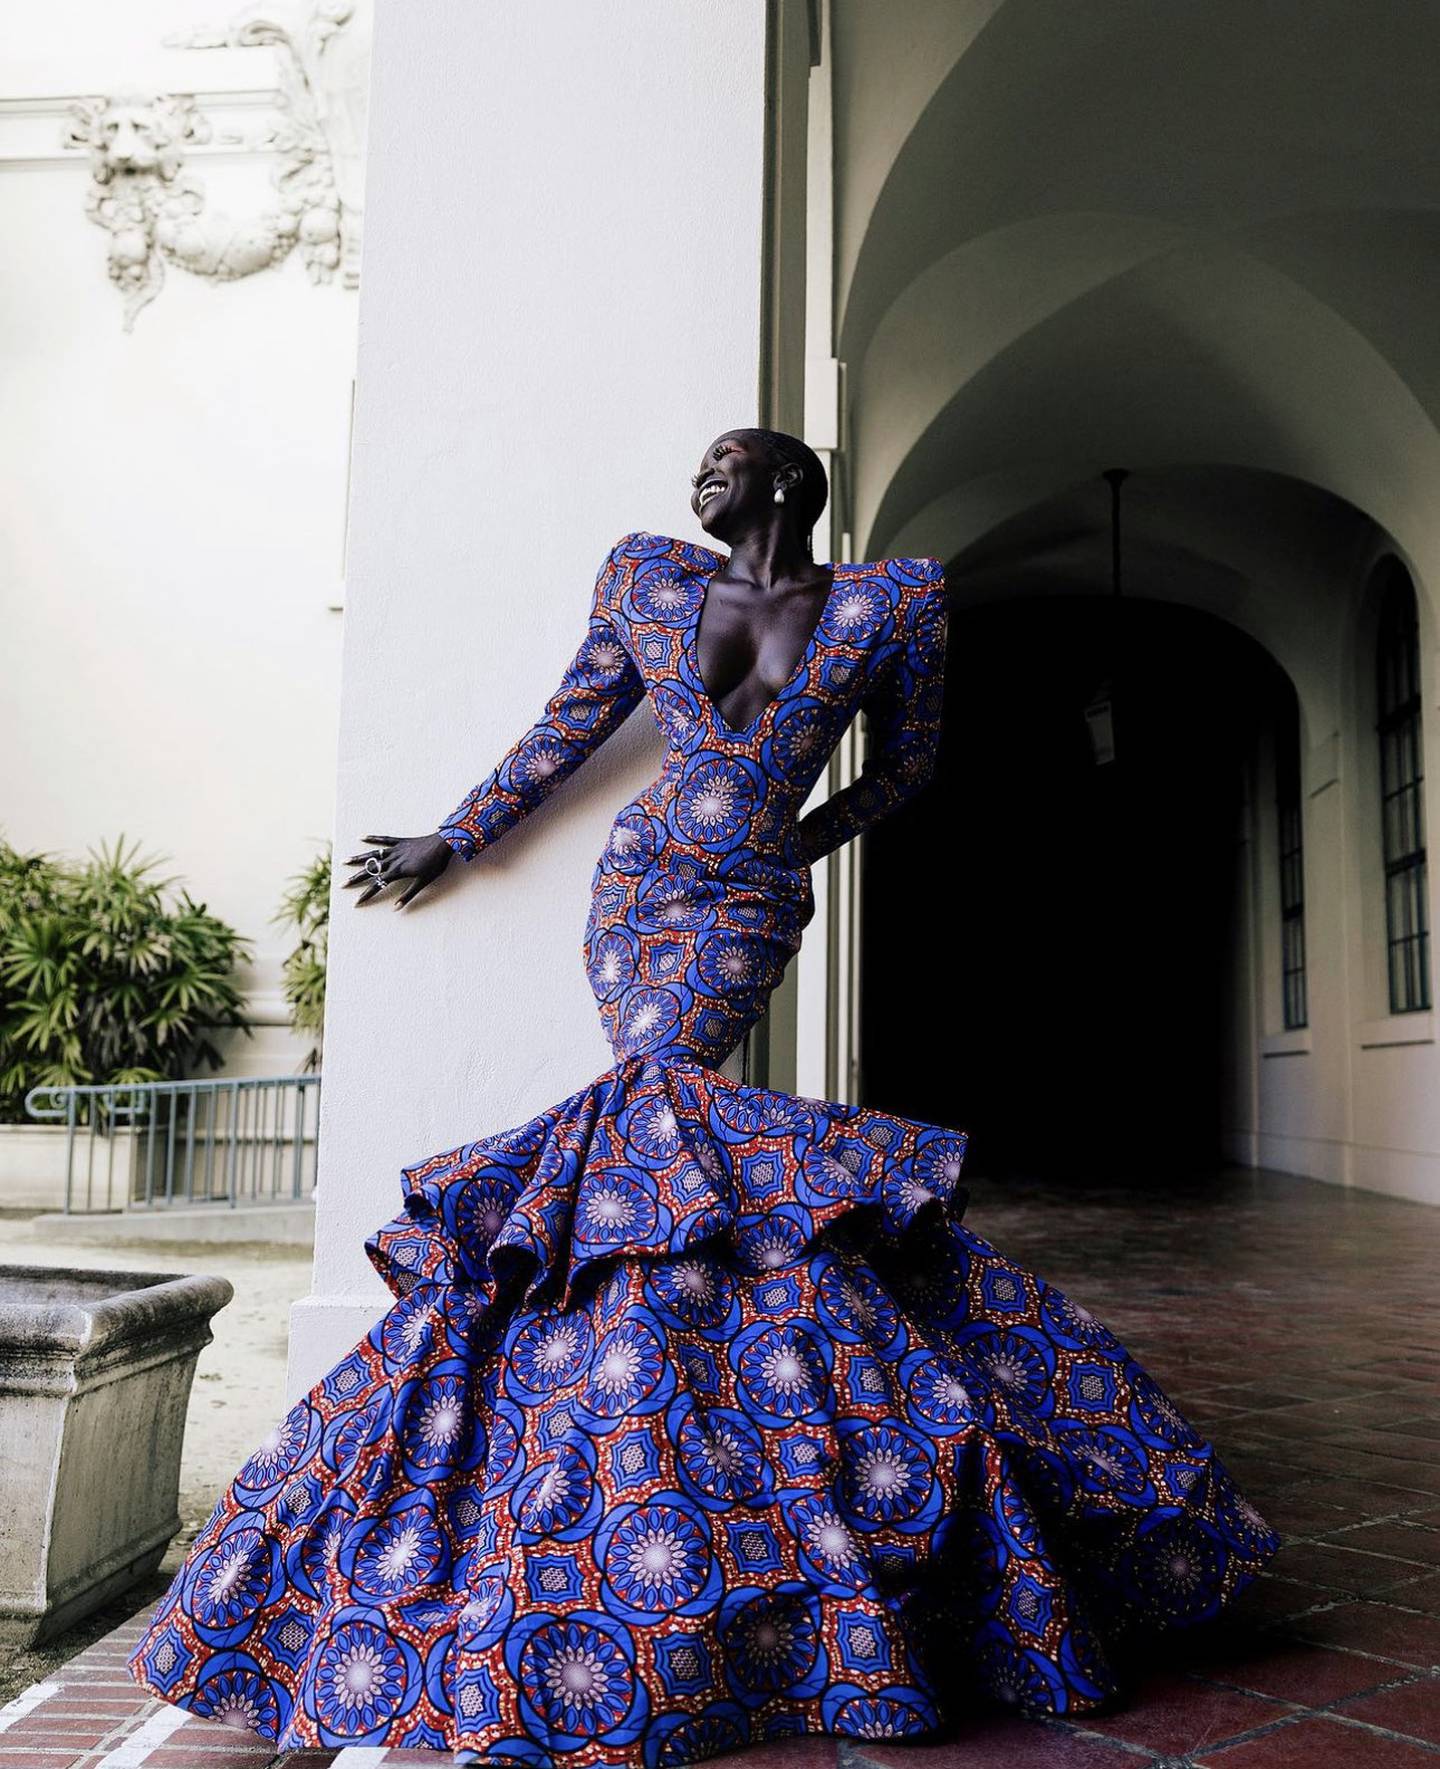 An outfit from Cameroon-born, US-based designer Claude Kameni whose namesake brand has attracted several celebrity clients.